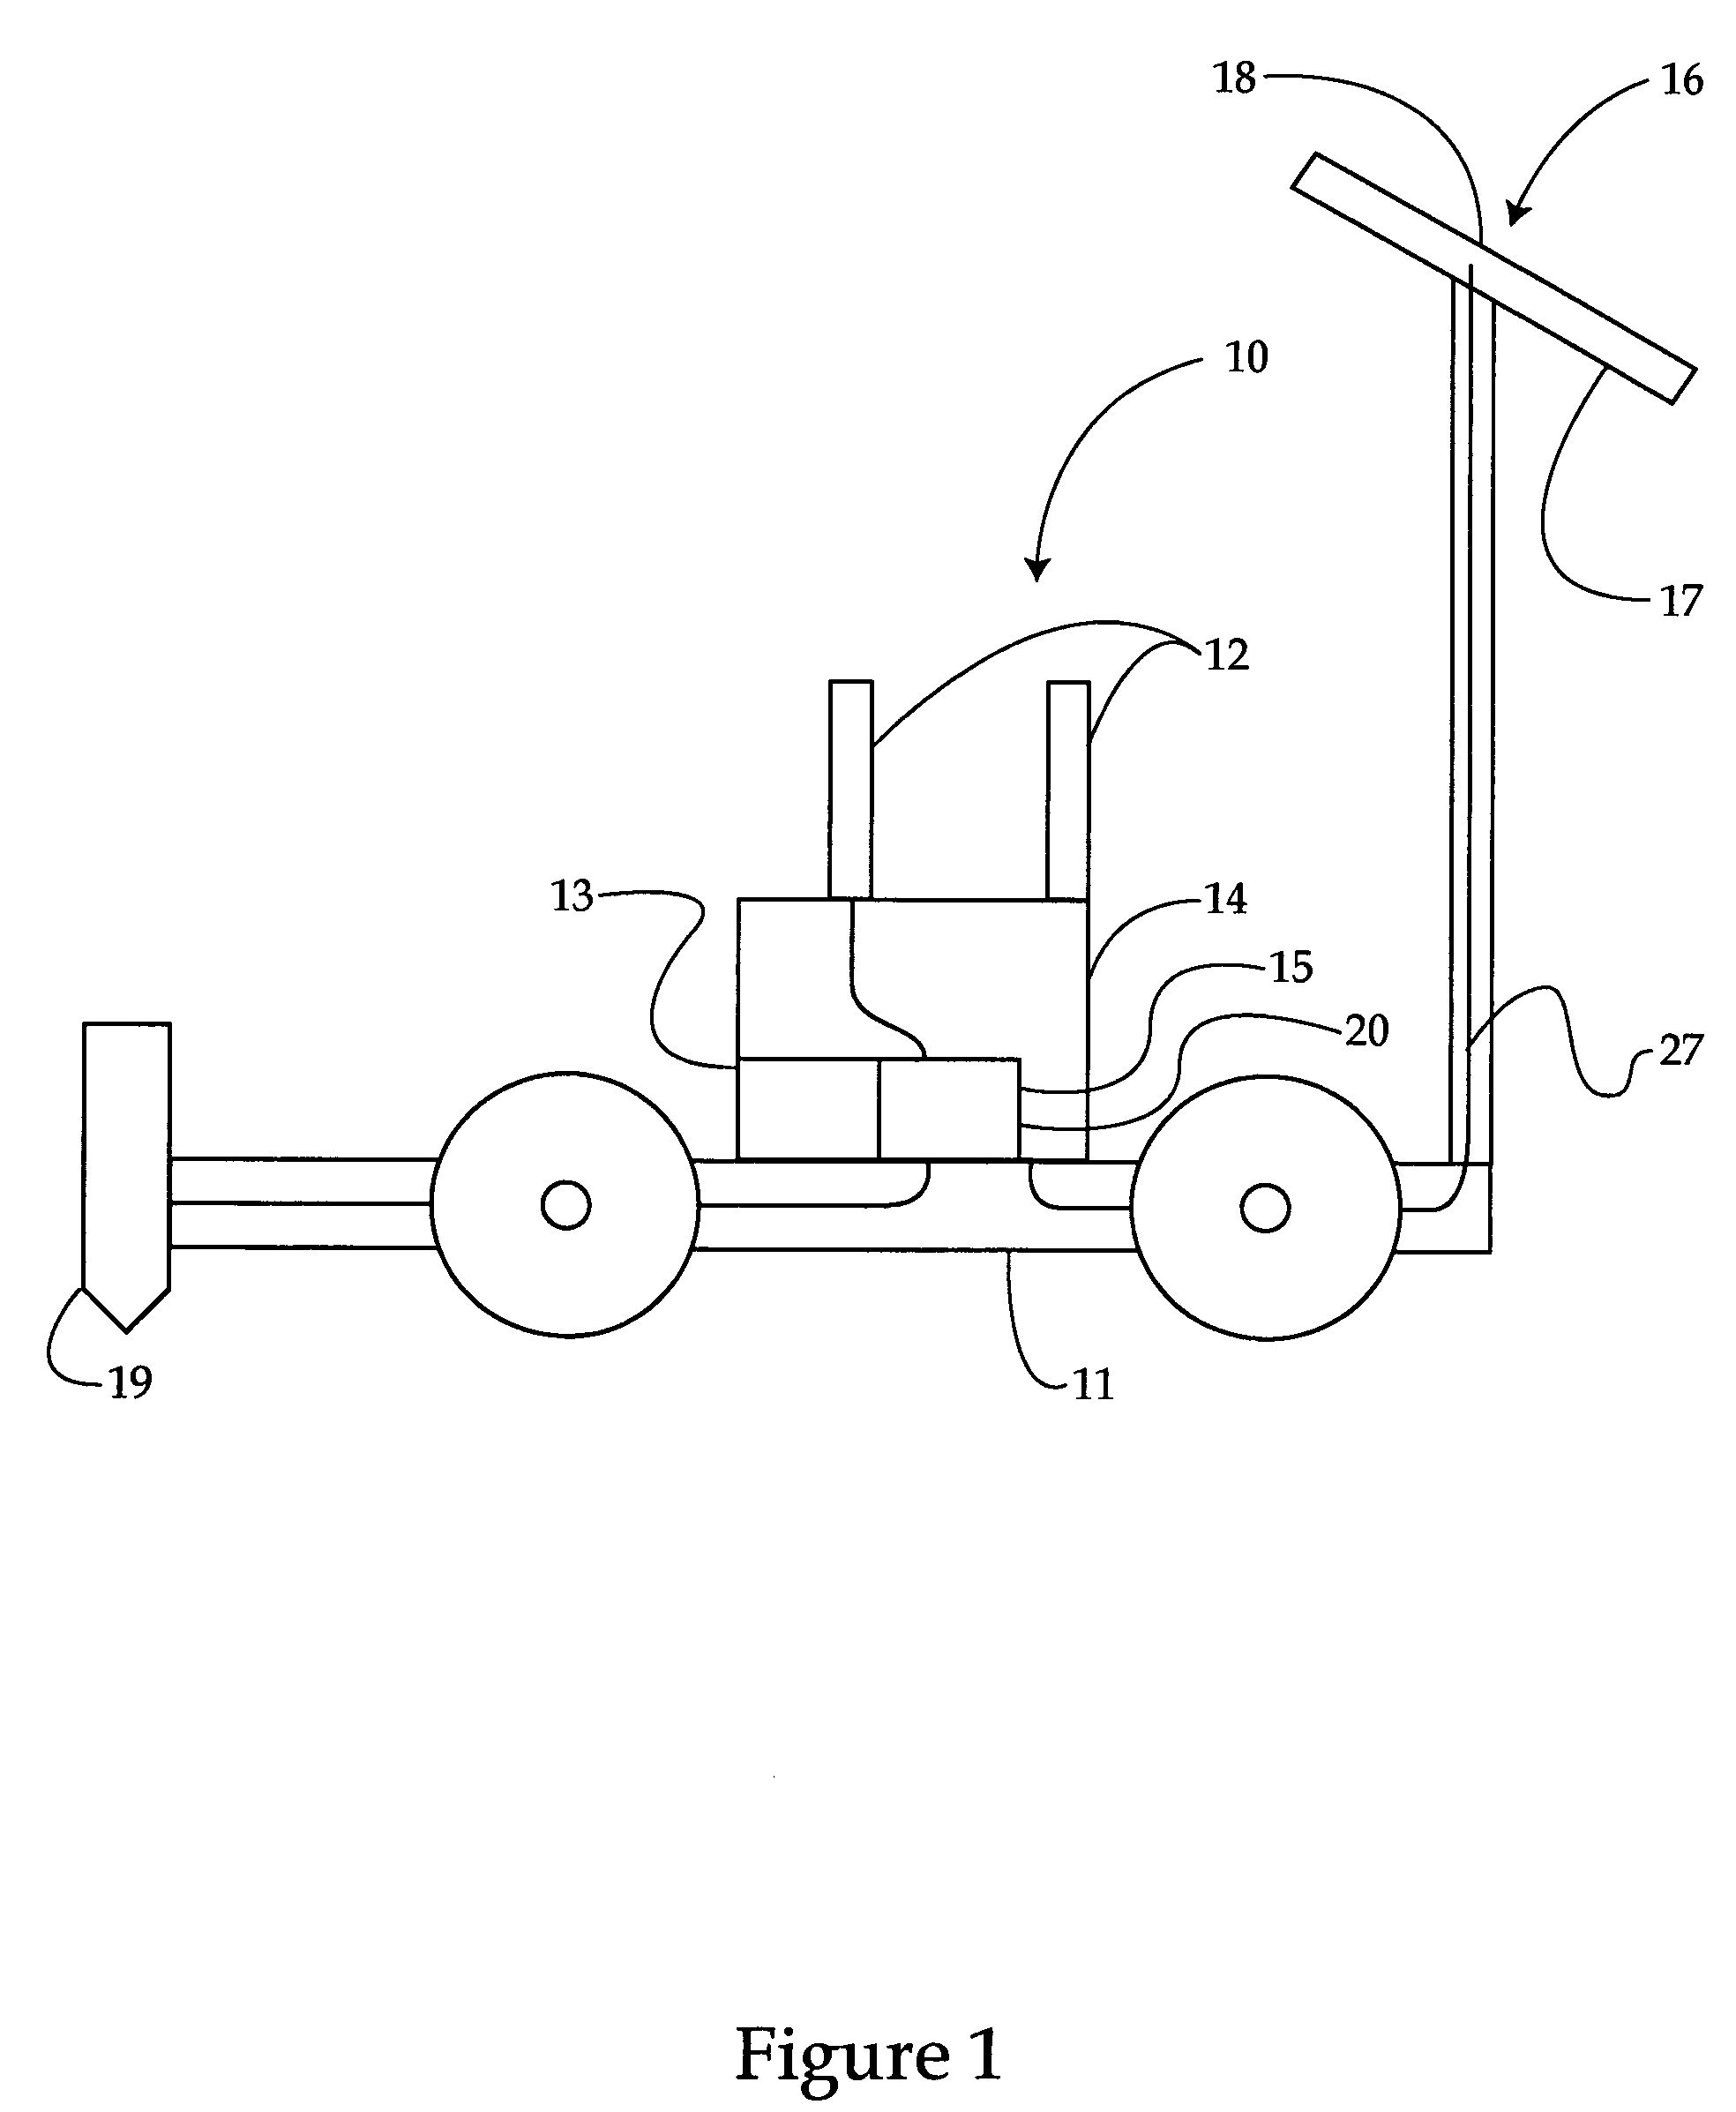 Apparatus and method for locating electronic job site plan features at a job site